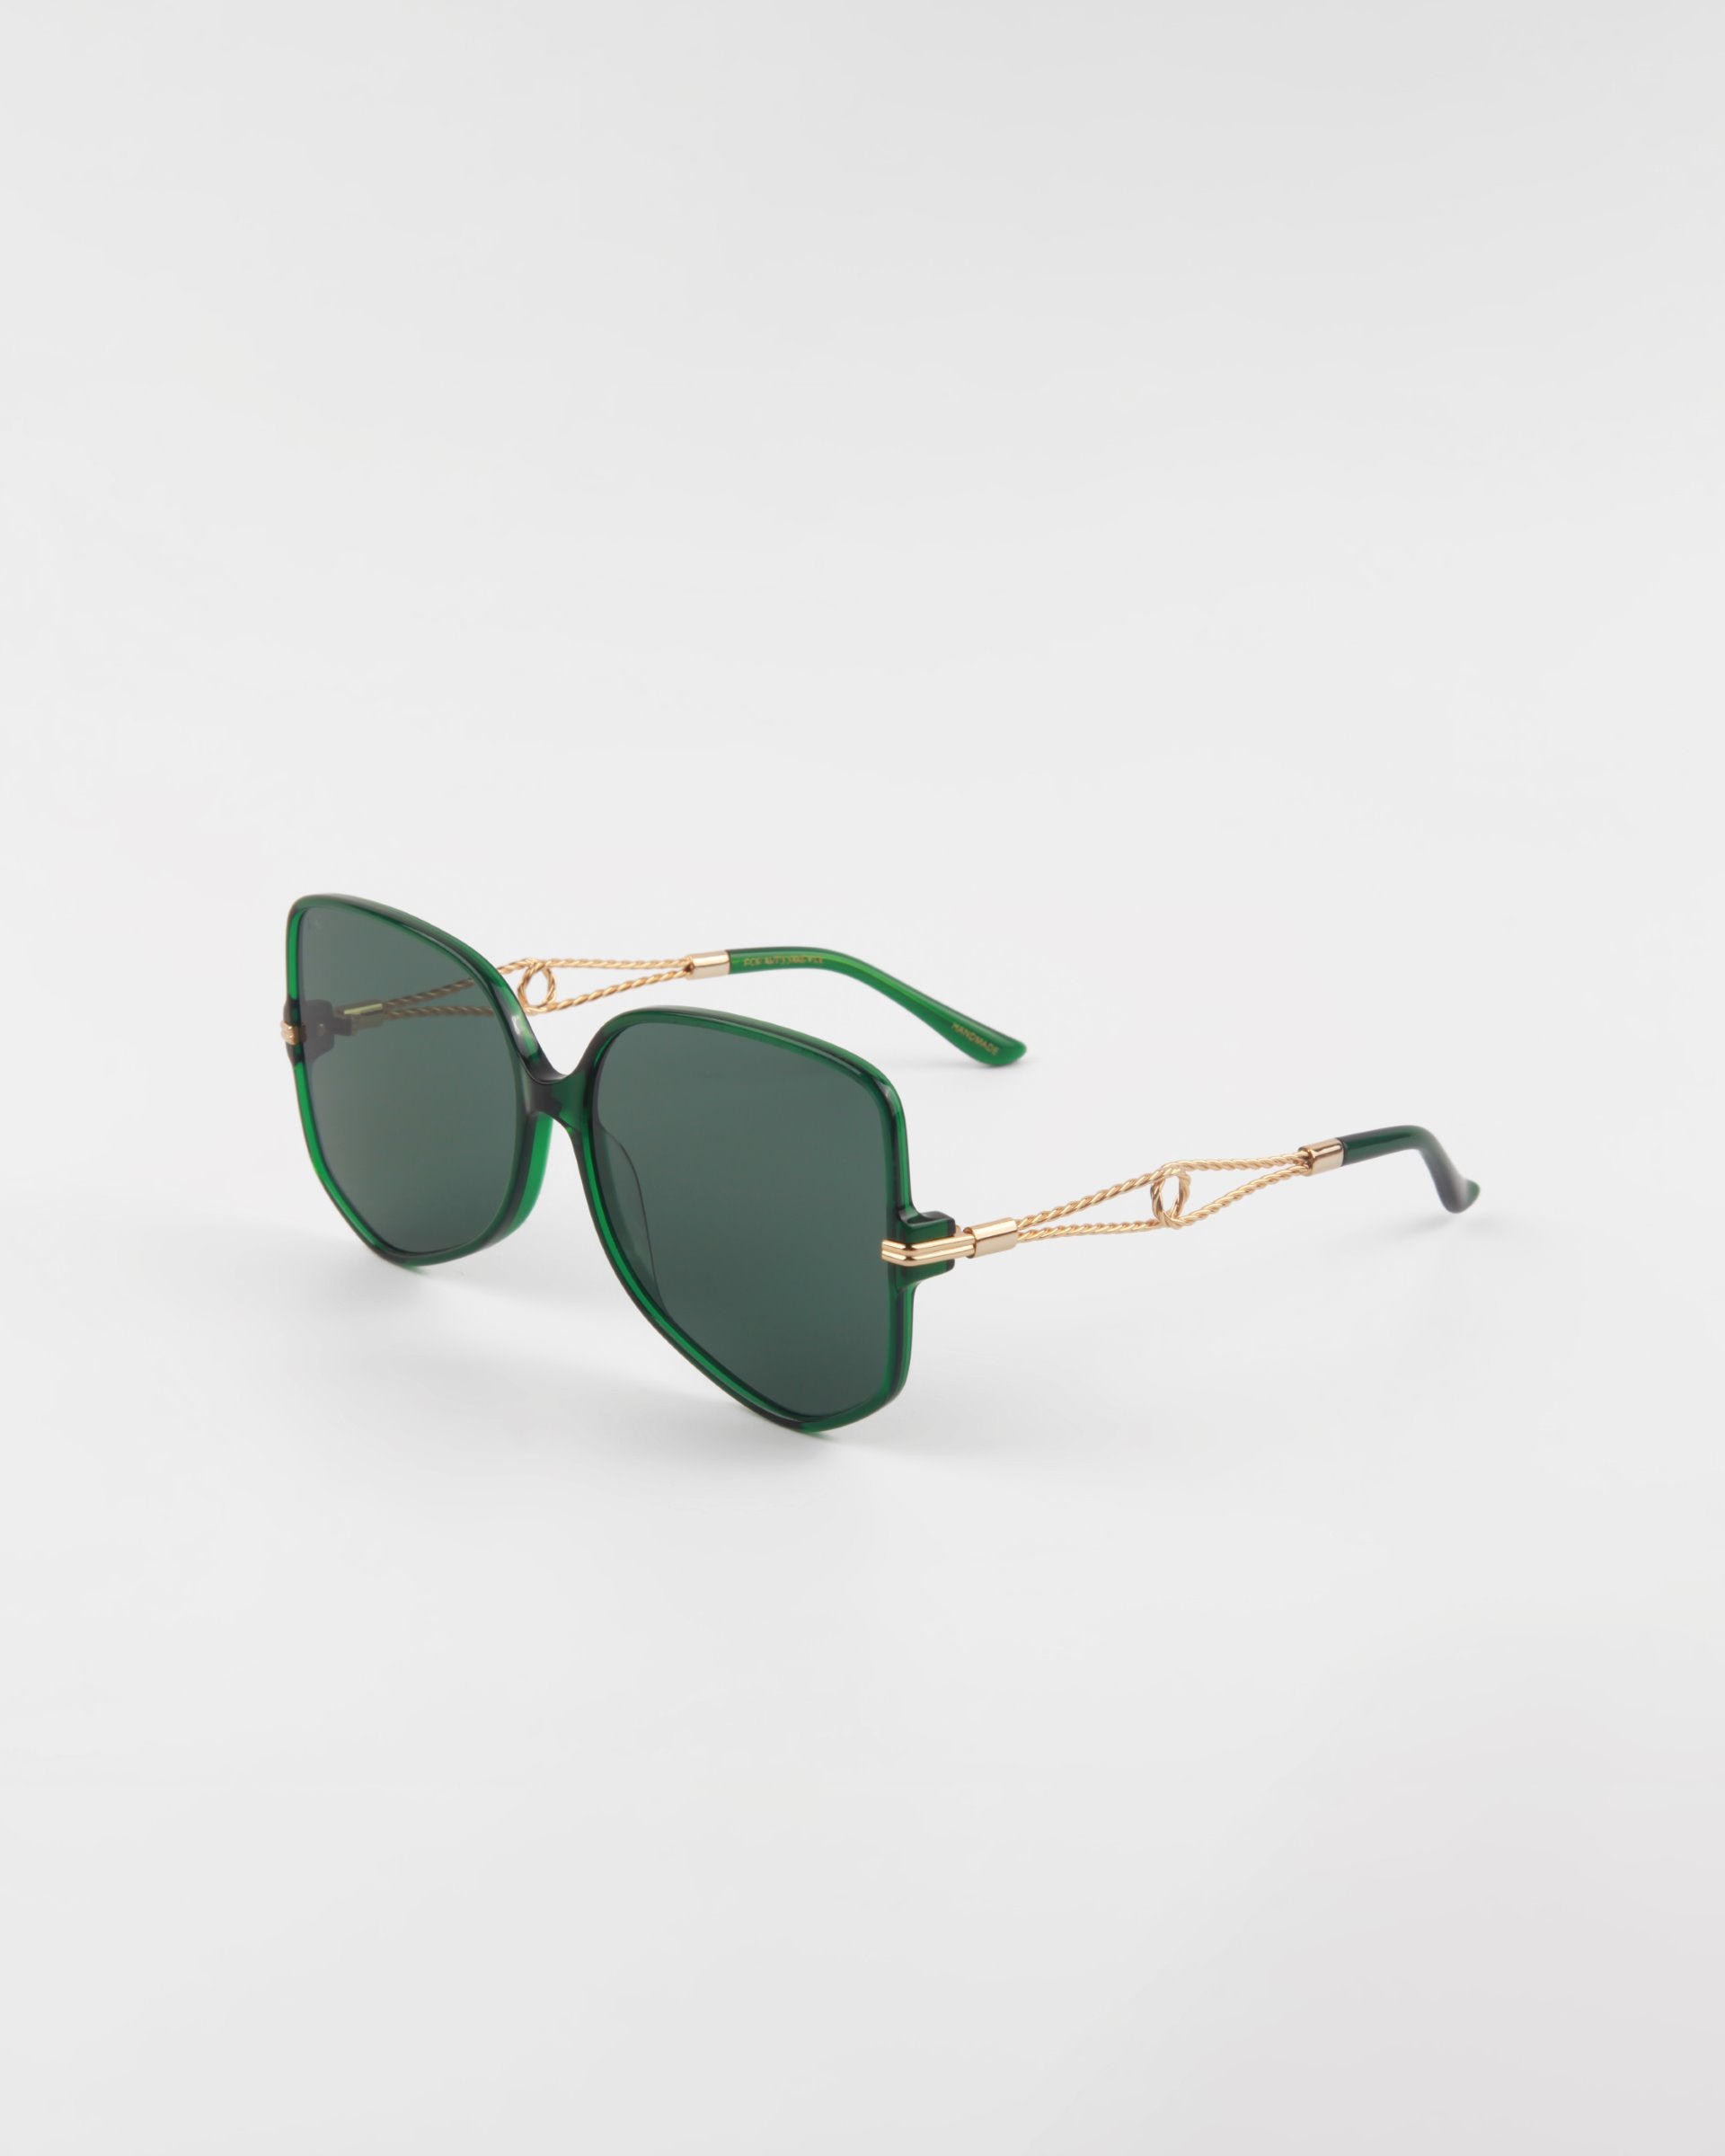 A pair of stylish handmade acetate eyewear with green-framed sunglasses featuring rectangular lenses and gold-accented temple arms, offering UVA &amp; UVB protection, set against a white background. The Voyager by For Art&#39;s Sake®.